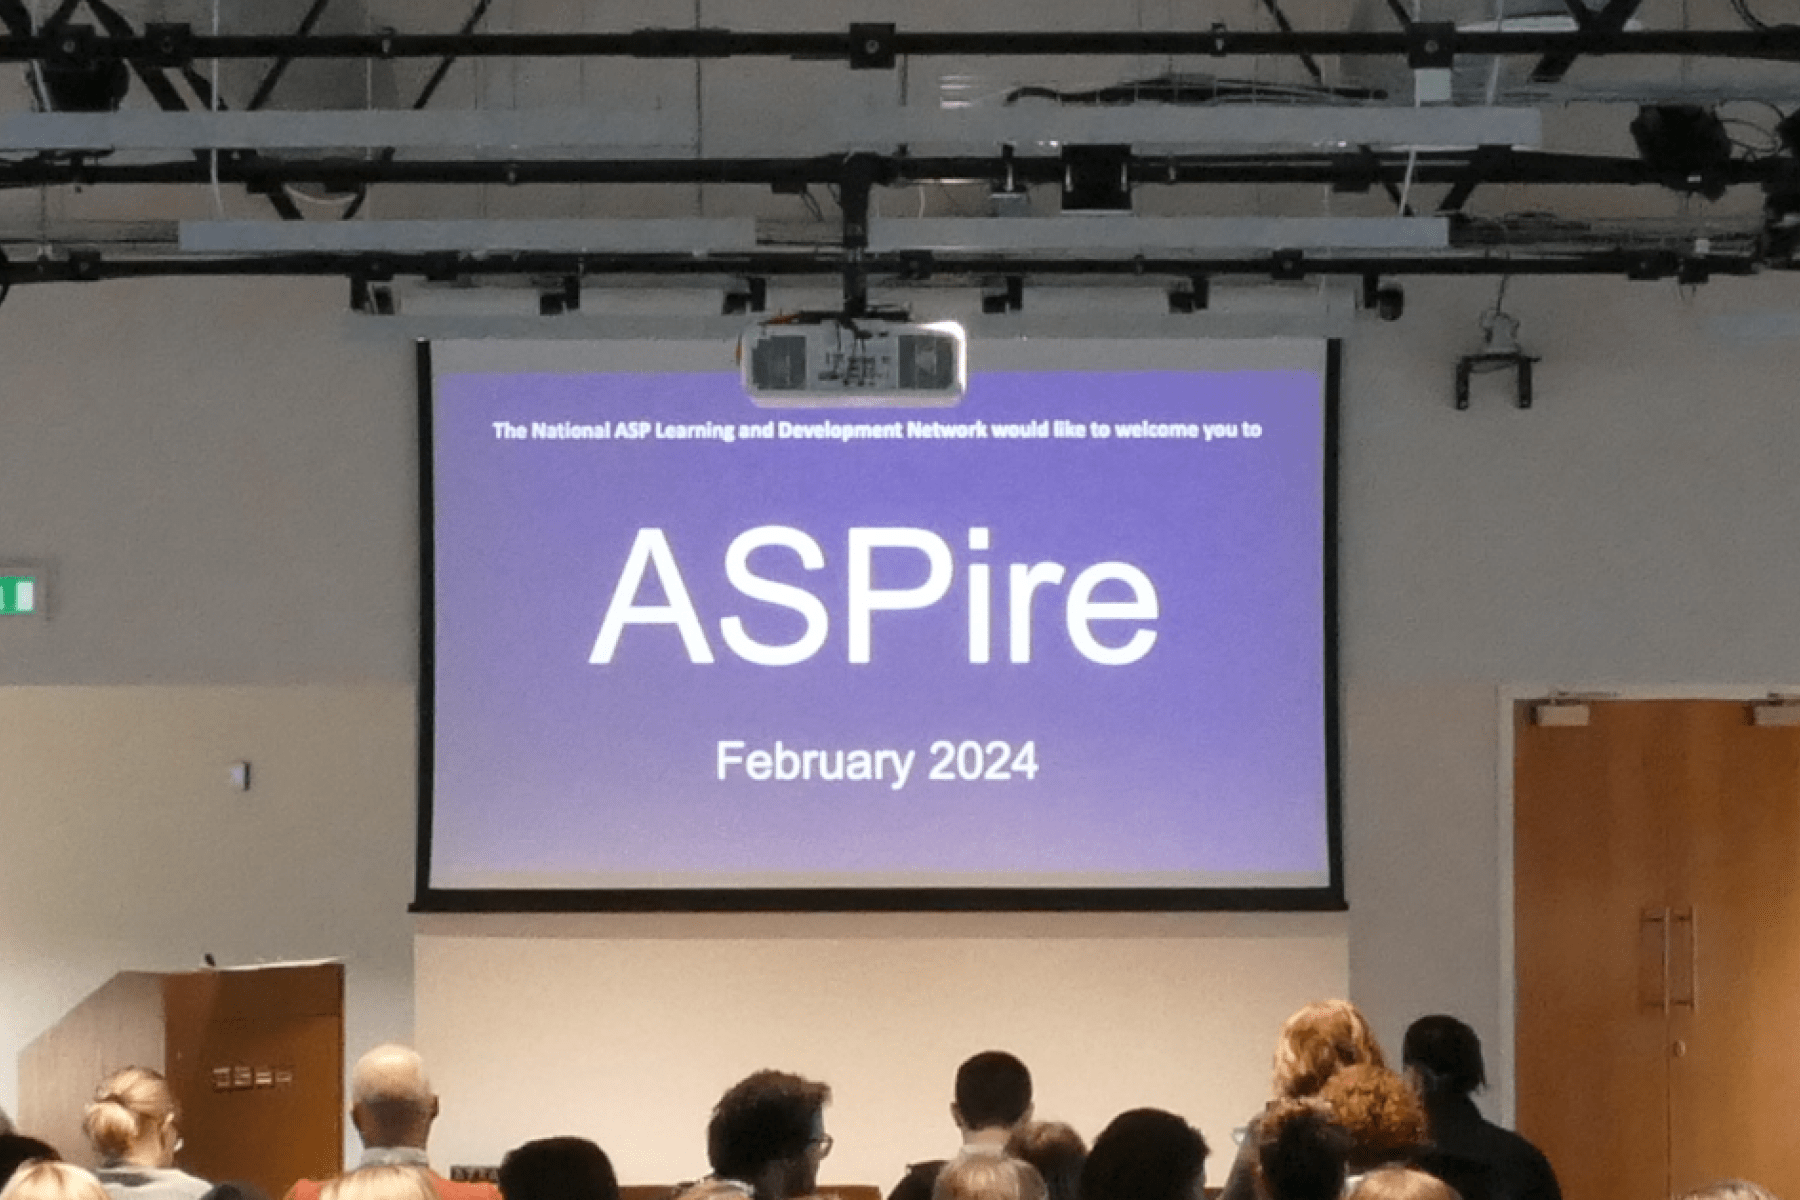 A projector screen with an image of a purple background with the white text ASPire